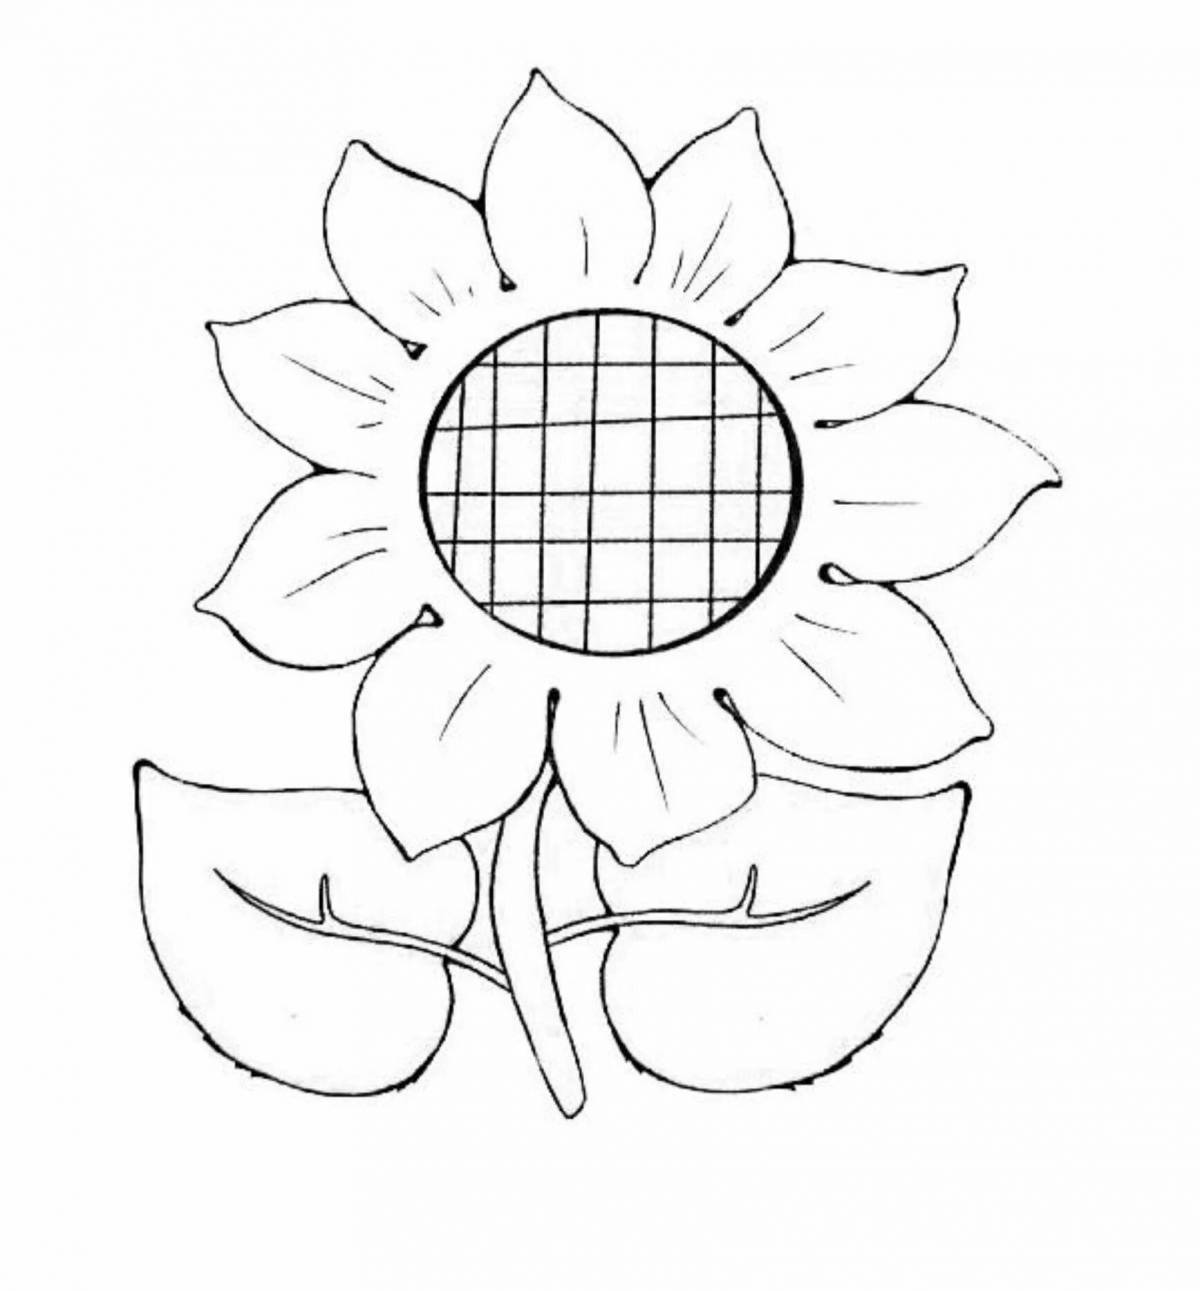 Amazing sunflower coloring pages for 2-3 year olds